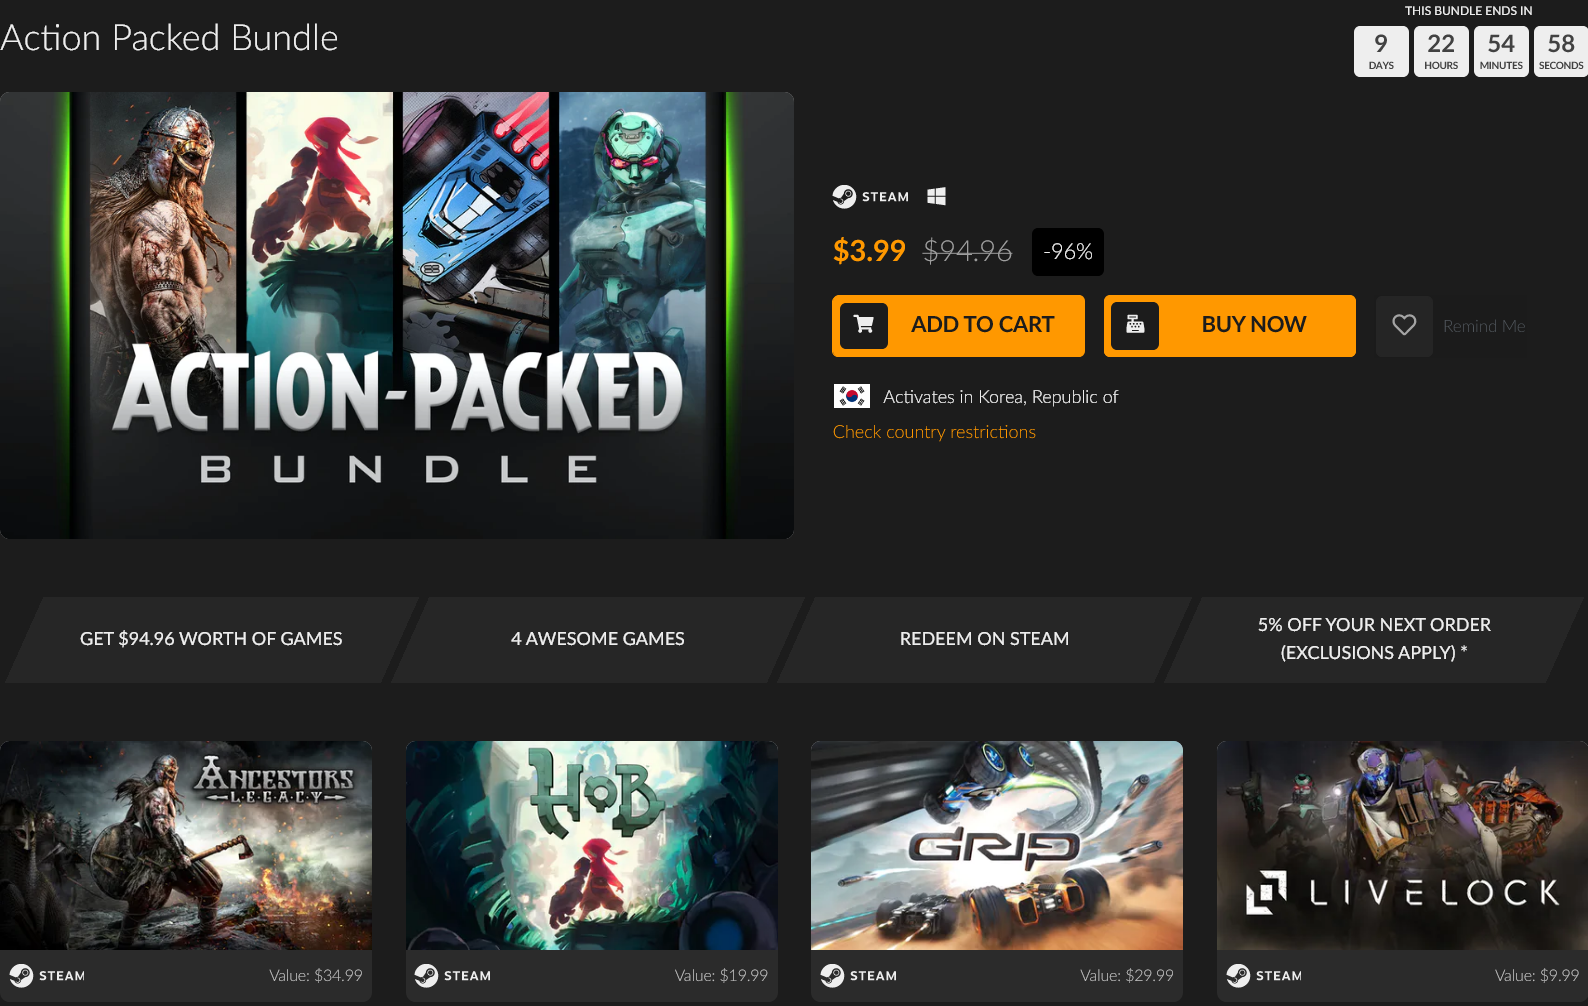 Screenshot_2020-10-22 Action Packed Bundle Steam Game Bundle Fanatical.png